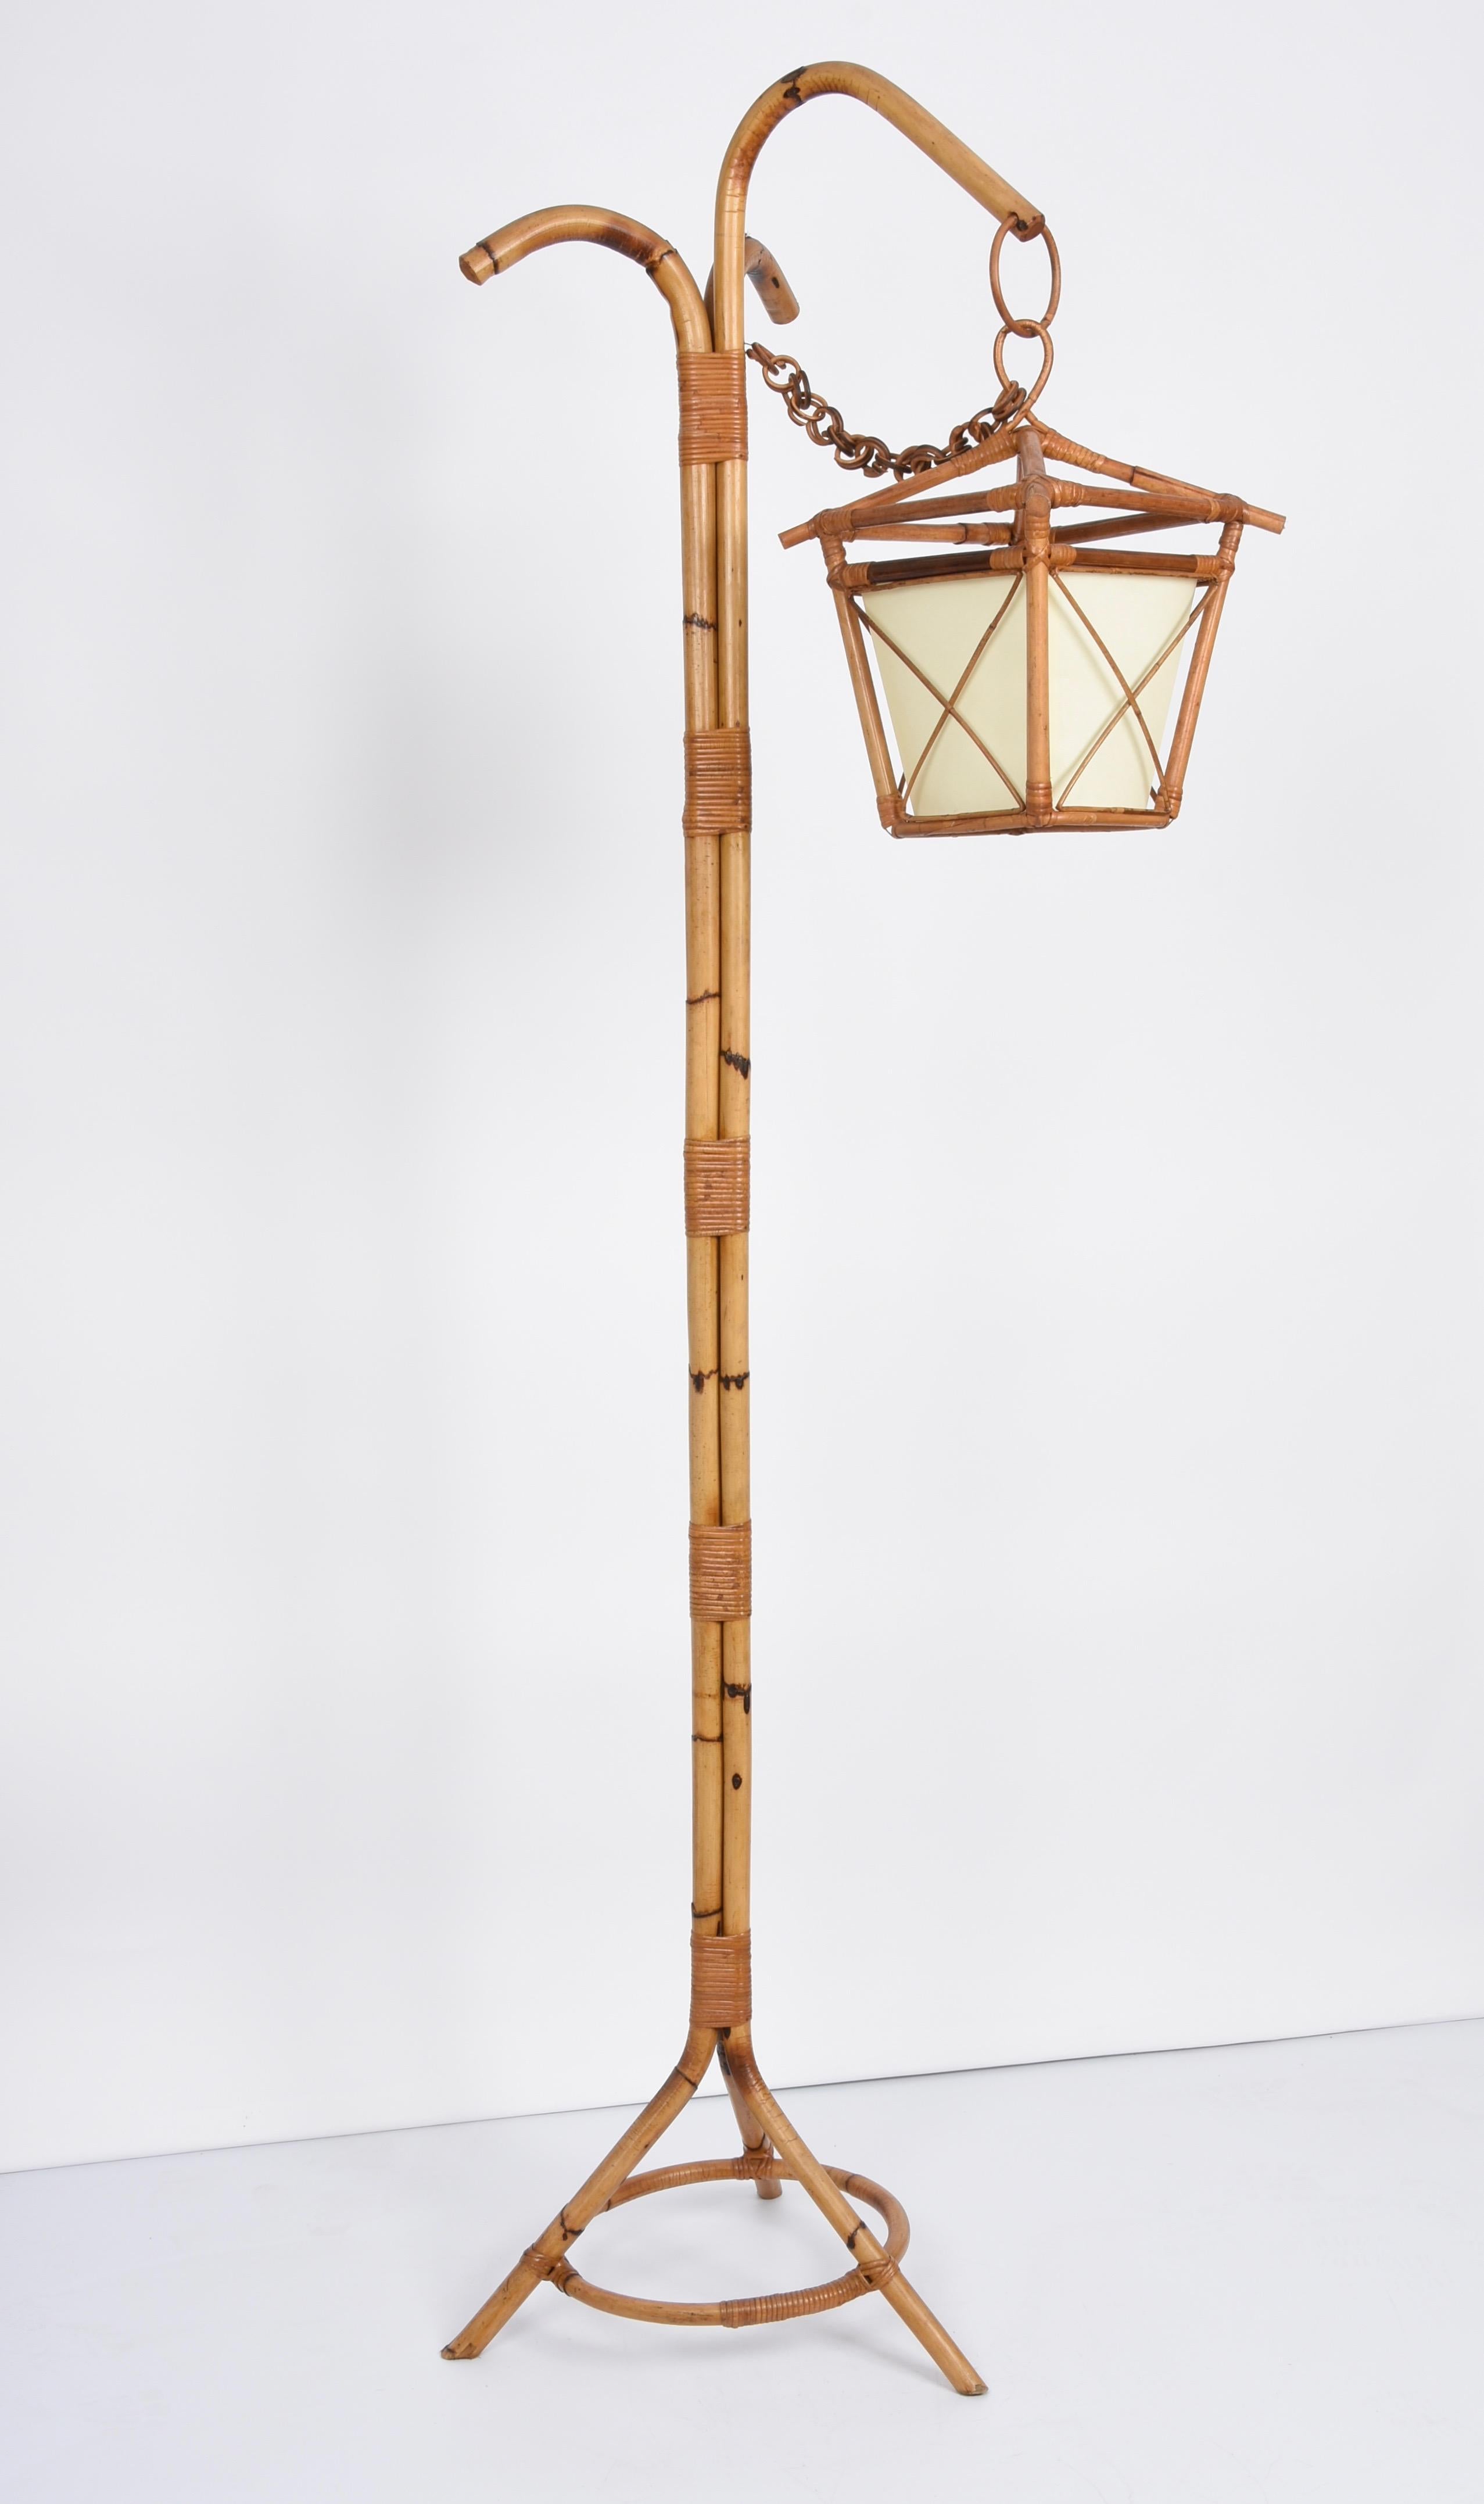 Midcentury Bamboo and Rattan Italian Floor Lamp with Tripod Base, 1950s For Sale 7